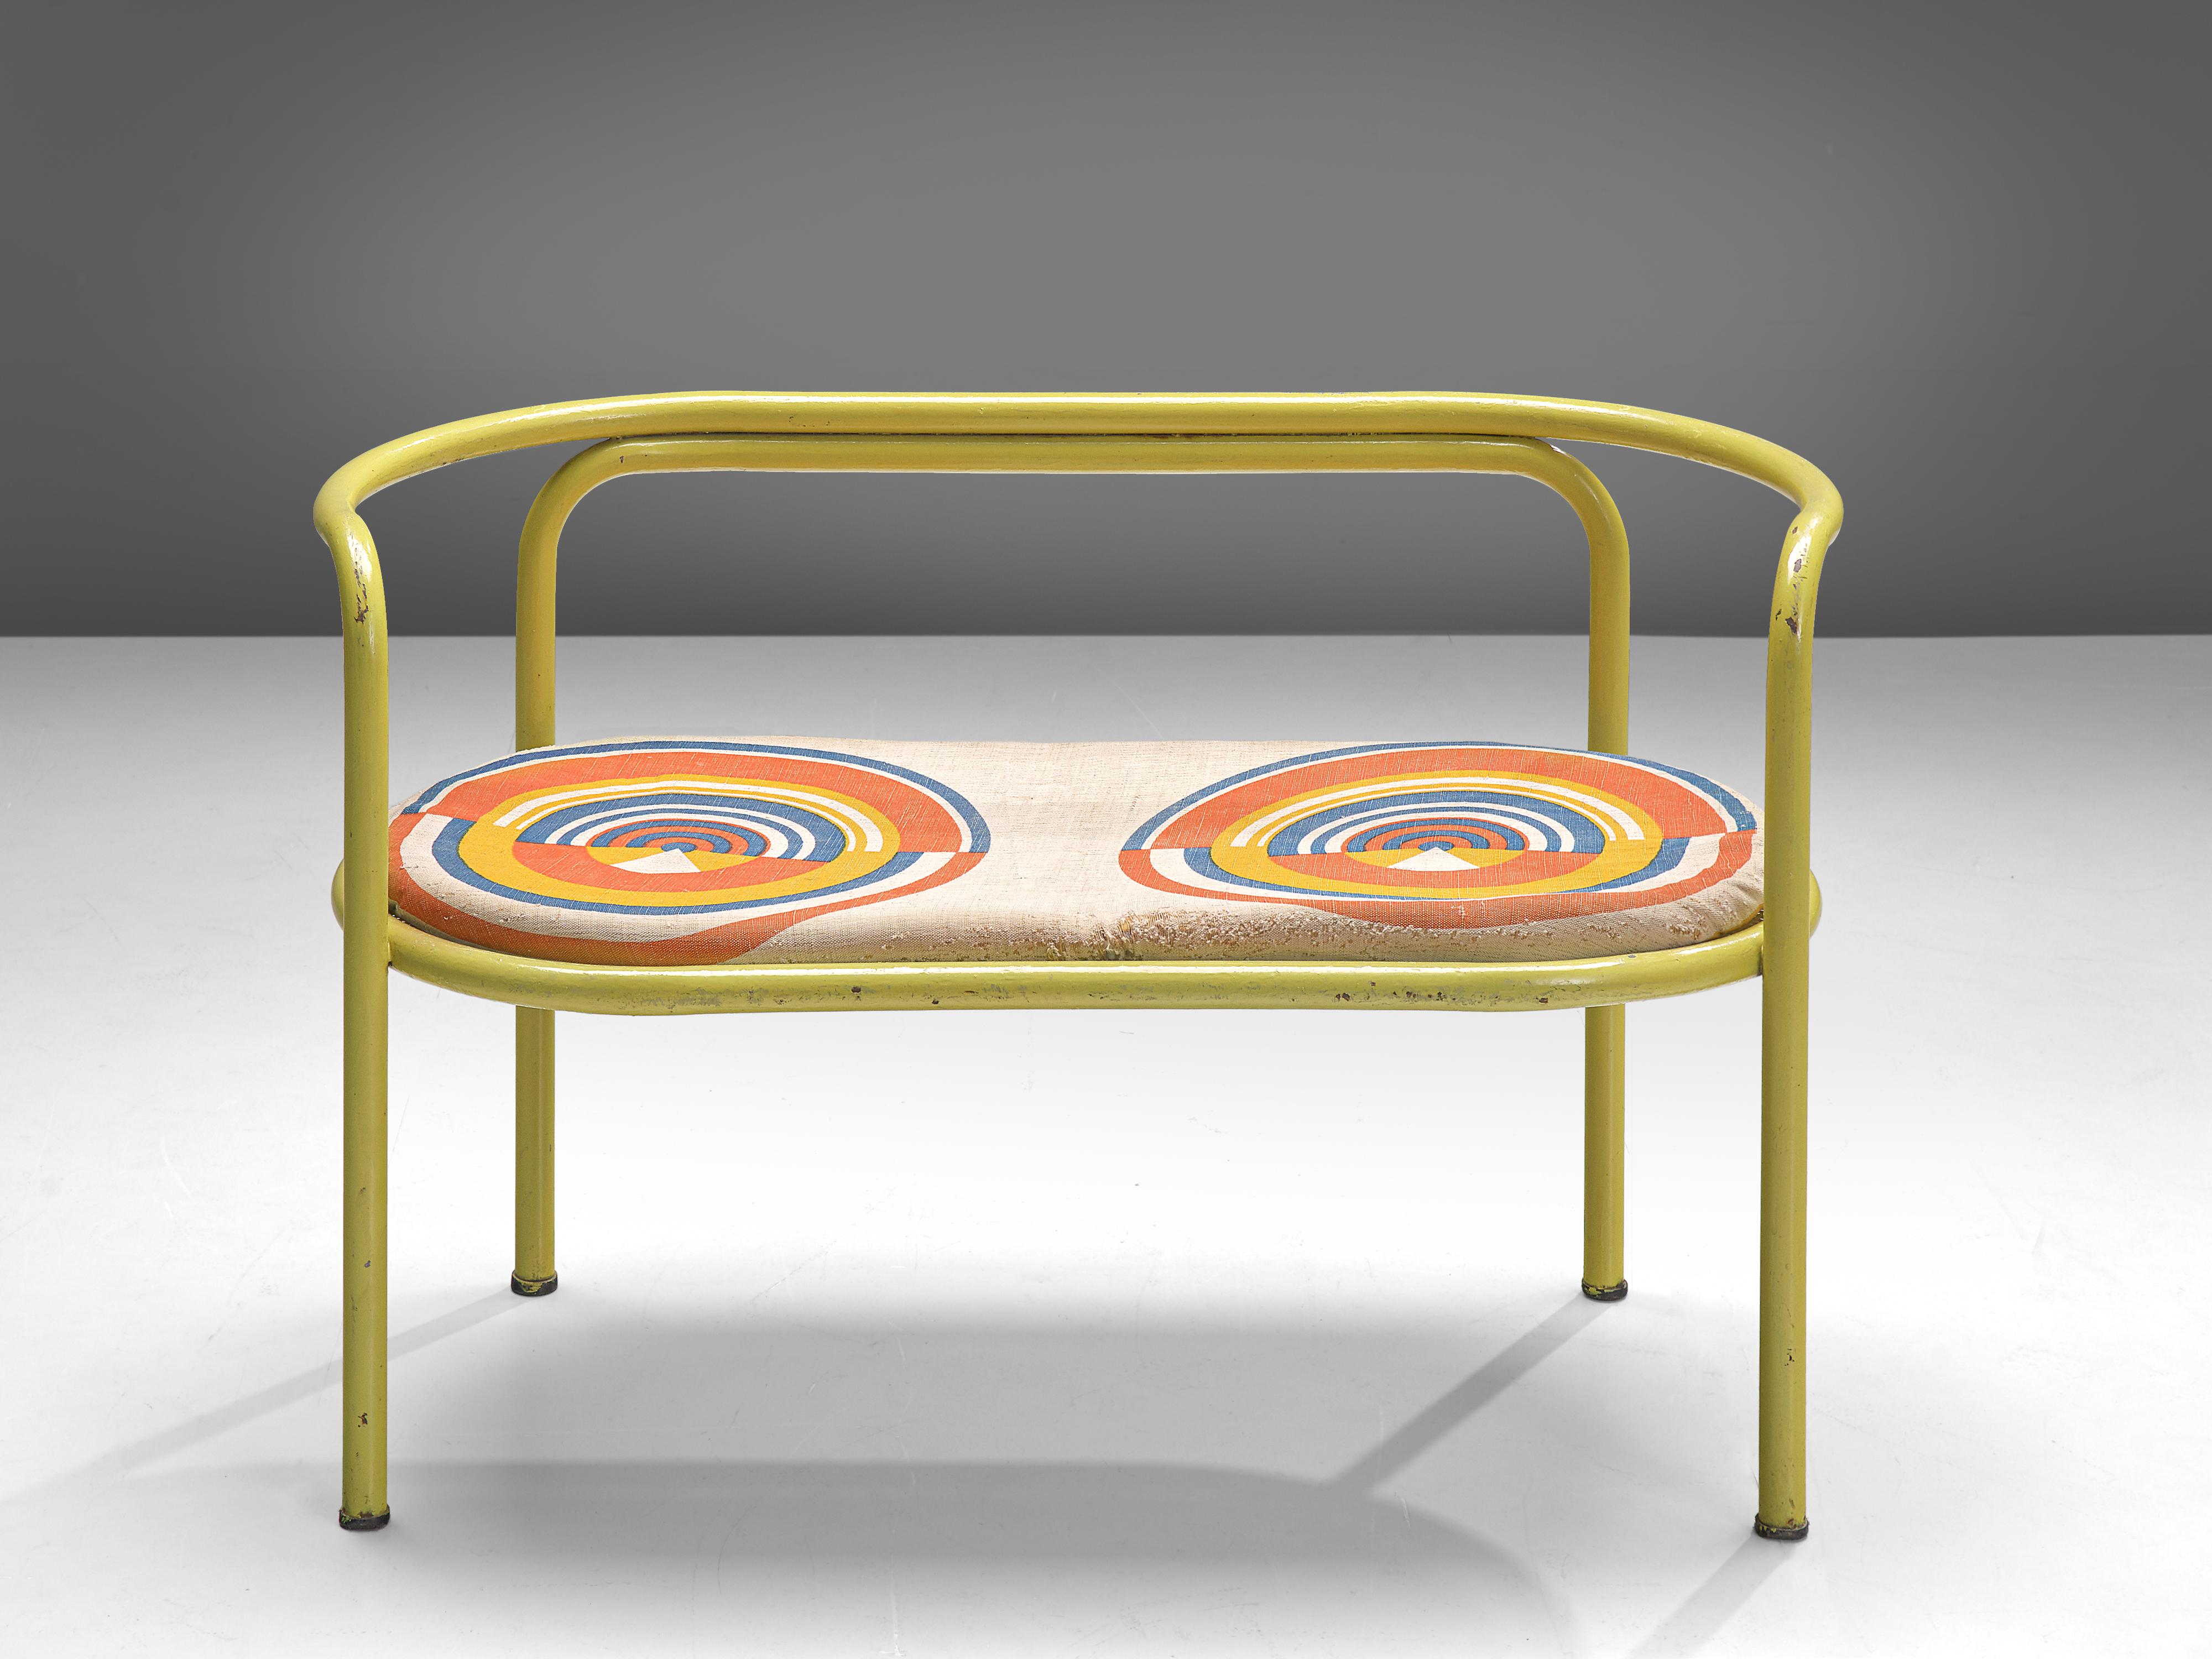 Gae Aulenti for Poltronova, 'Locus Solus' bench, lacquered tubular steel, fabric, Italy, 1964

Italian designer Gae Aulenti designed the ‘Locus Solus’ series in 1964 especially for the movie ‘La Piscine’ with Romy Schneider and Alain Delon. The